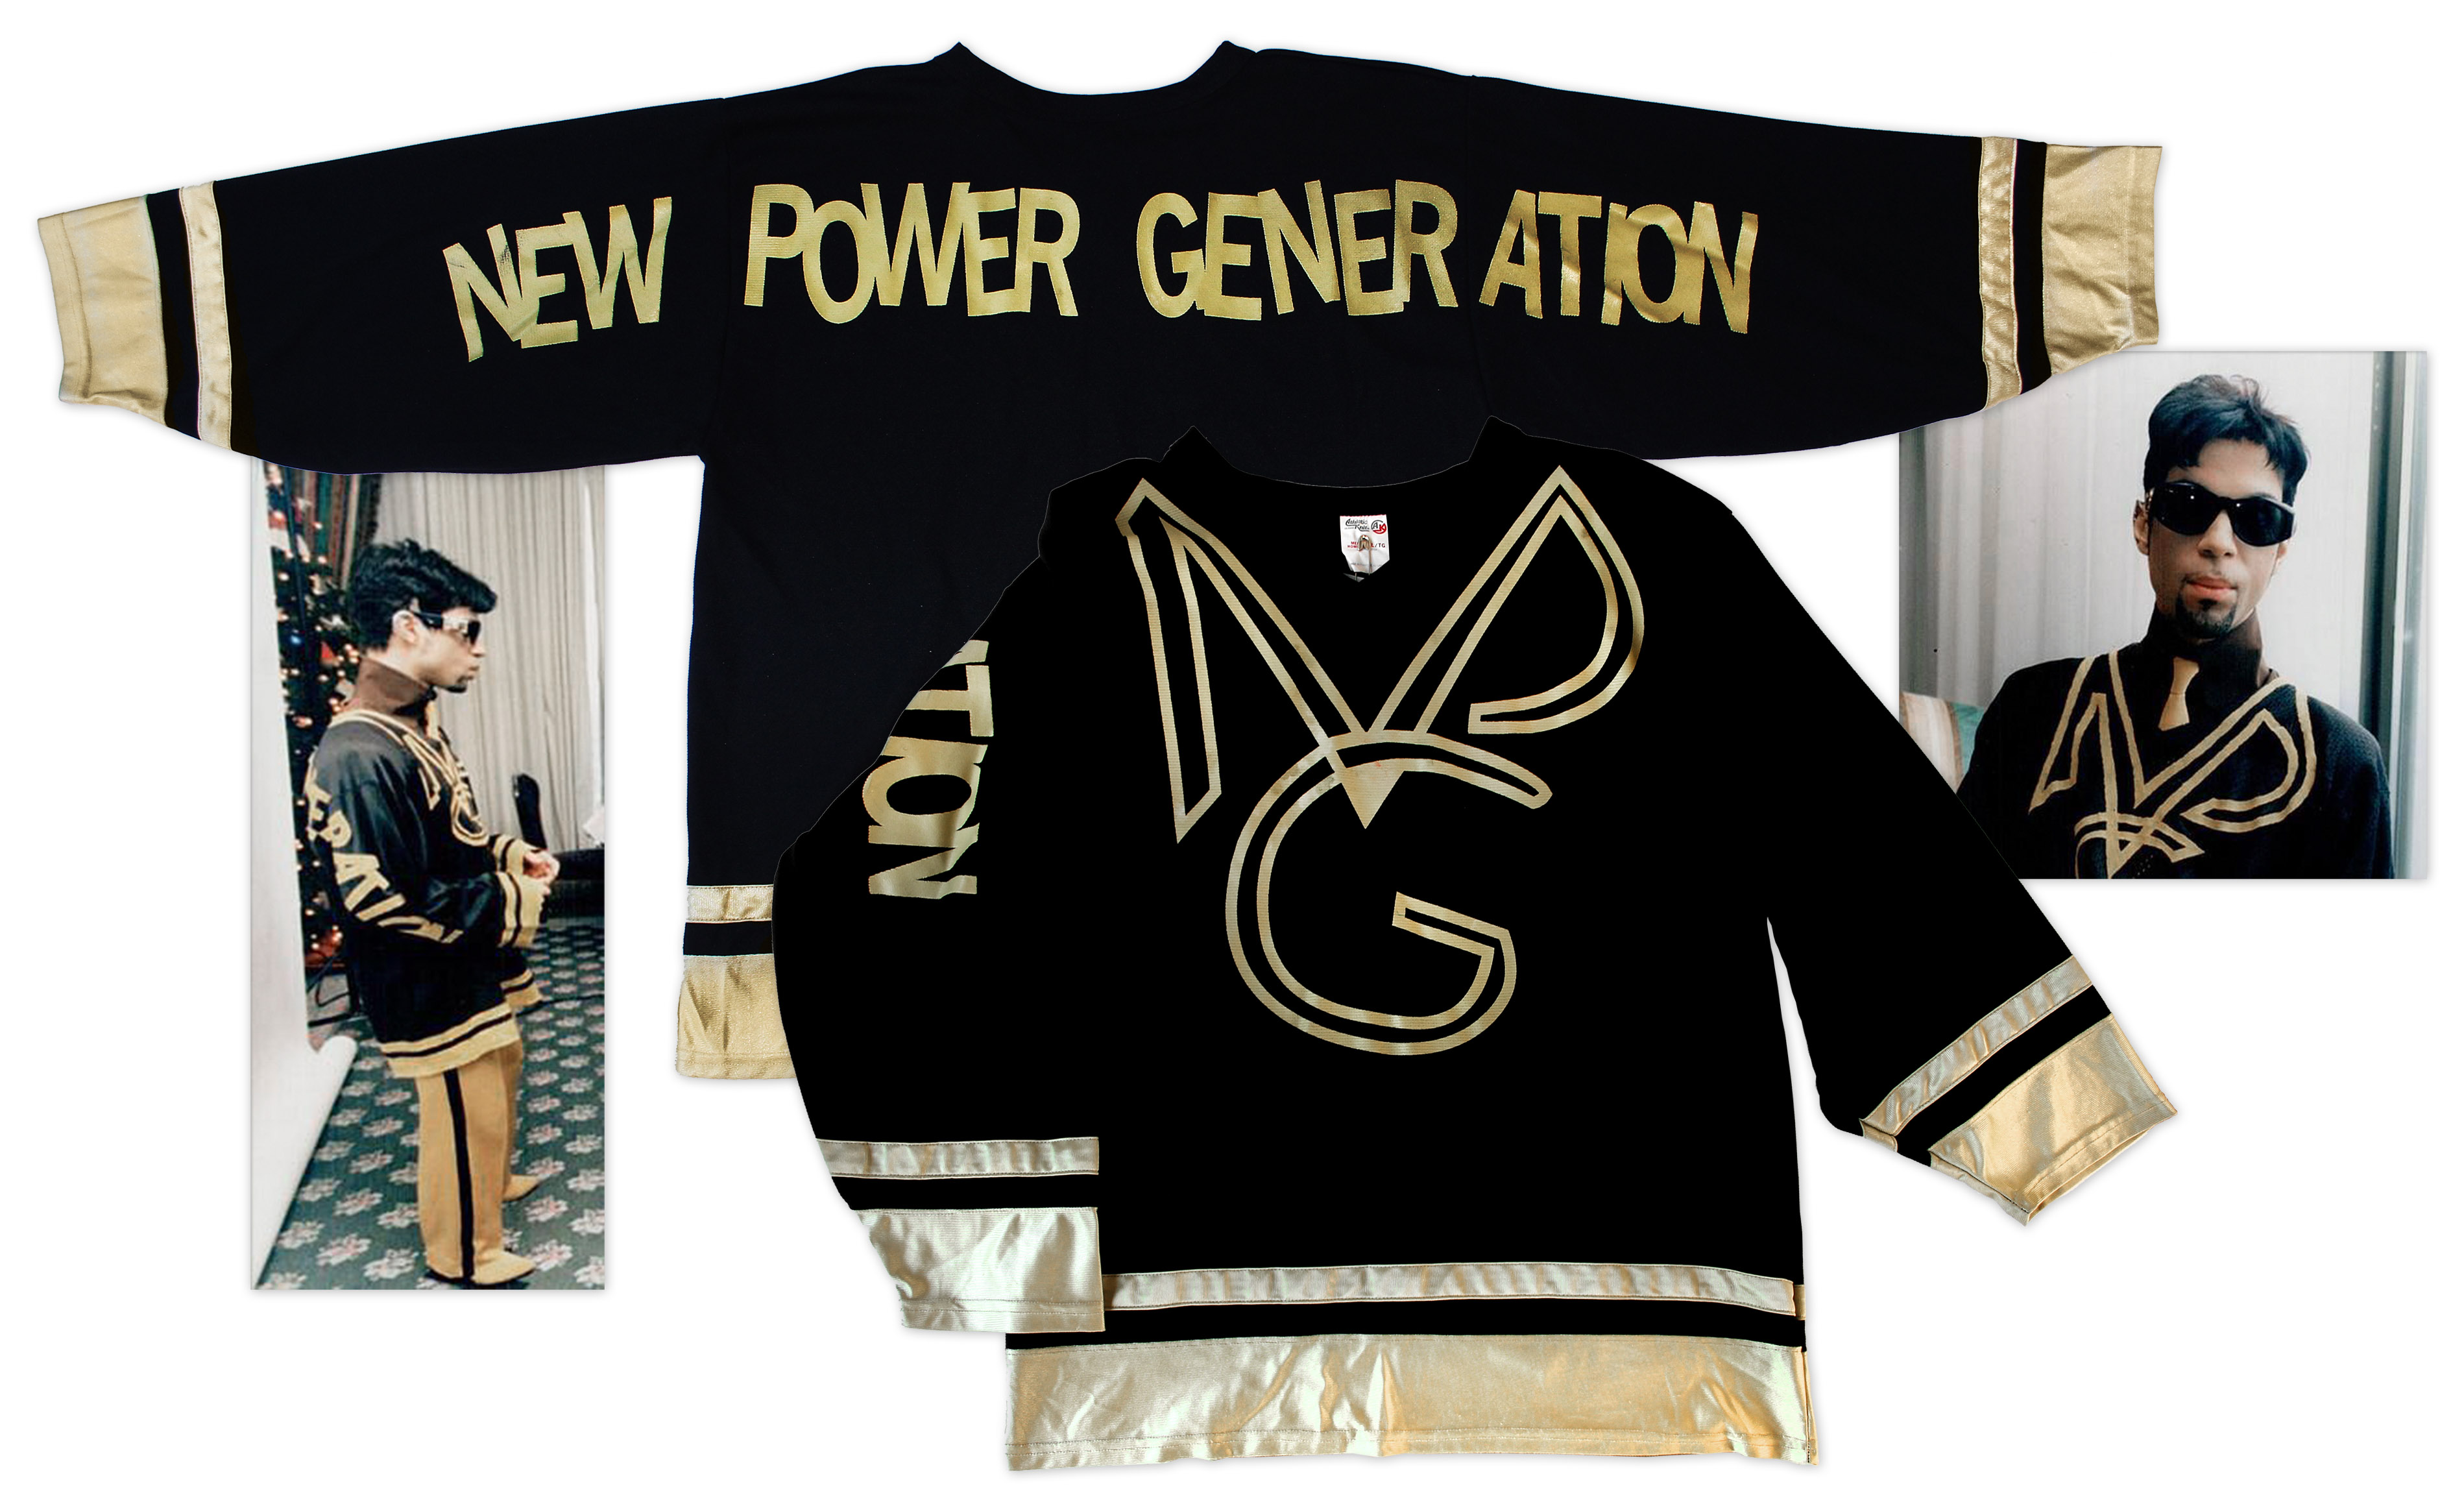 Prince worn jacket Prince worn jacket Prince Worn Jersey Bearing the Name of His Band & Label NPG, New Power Generation